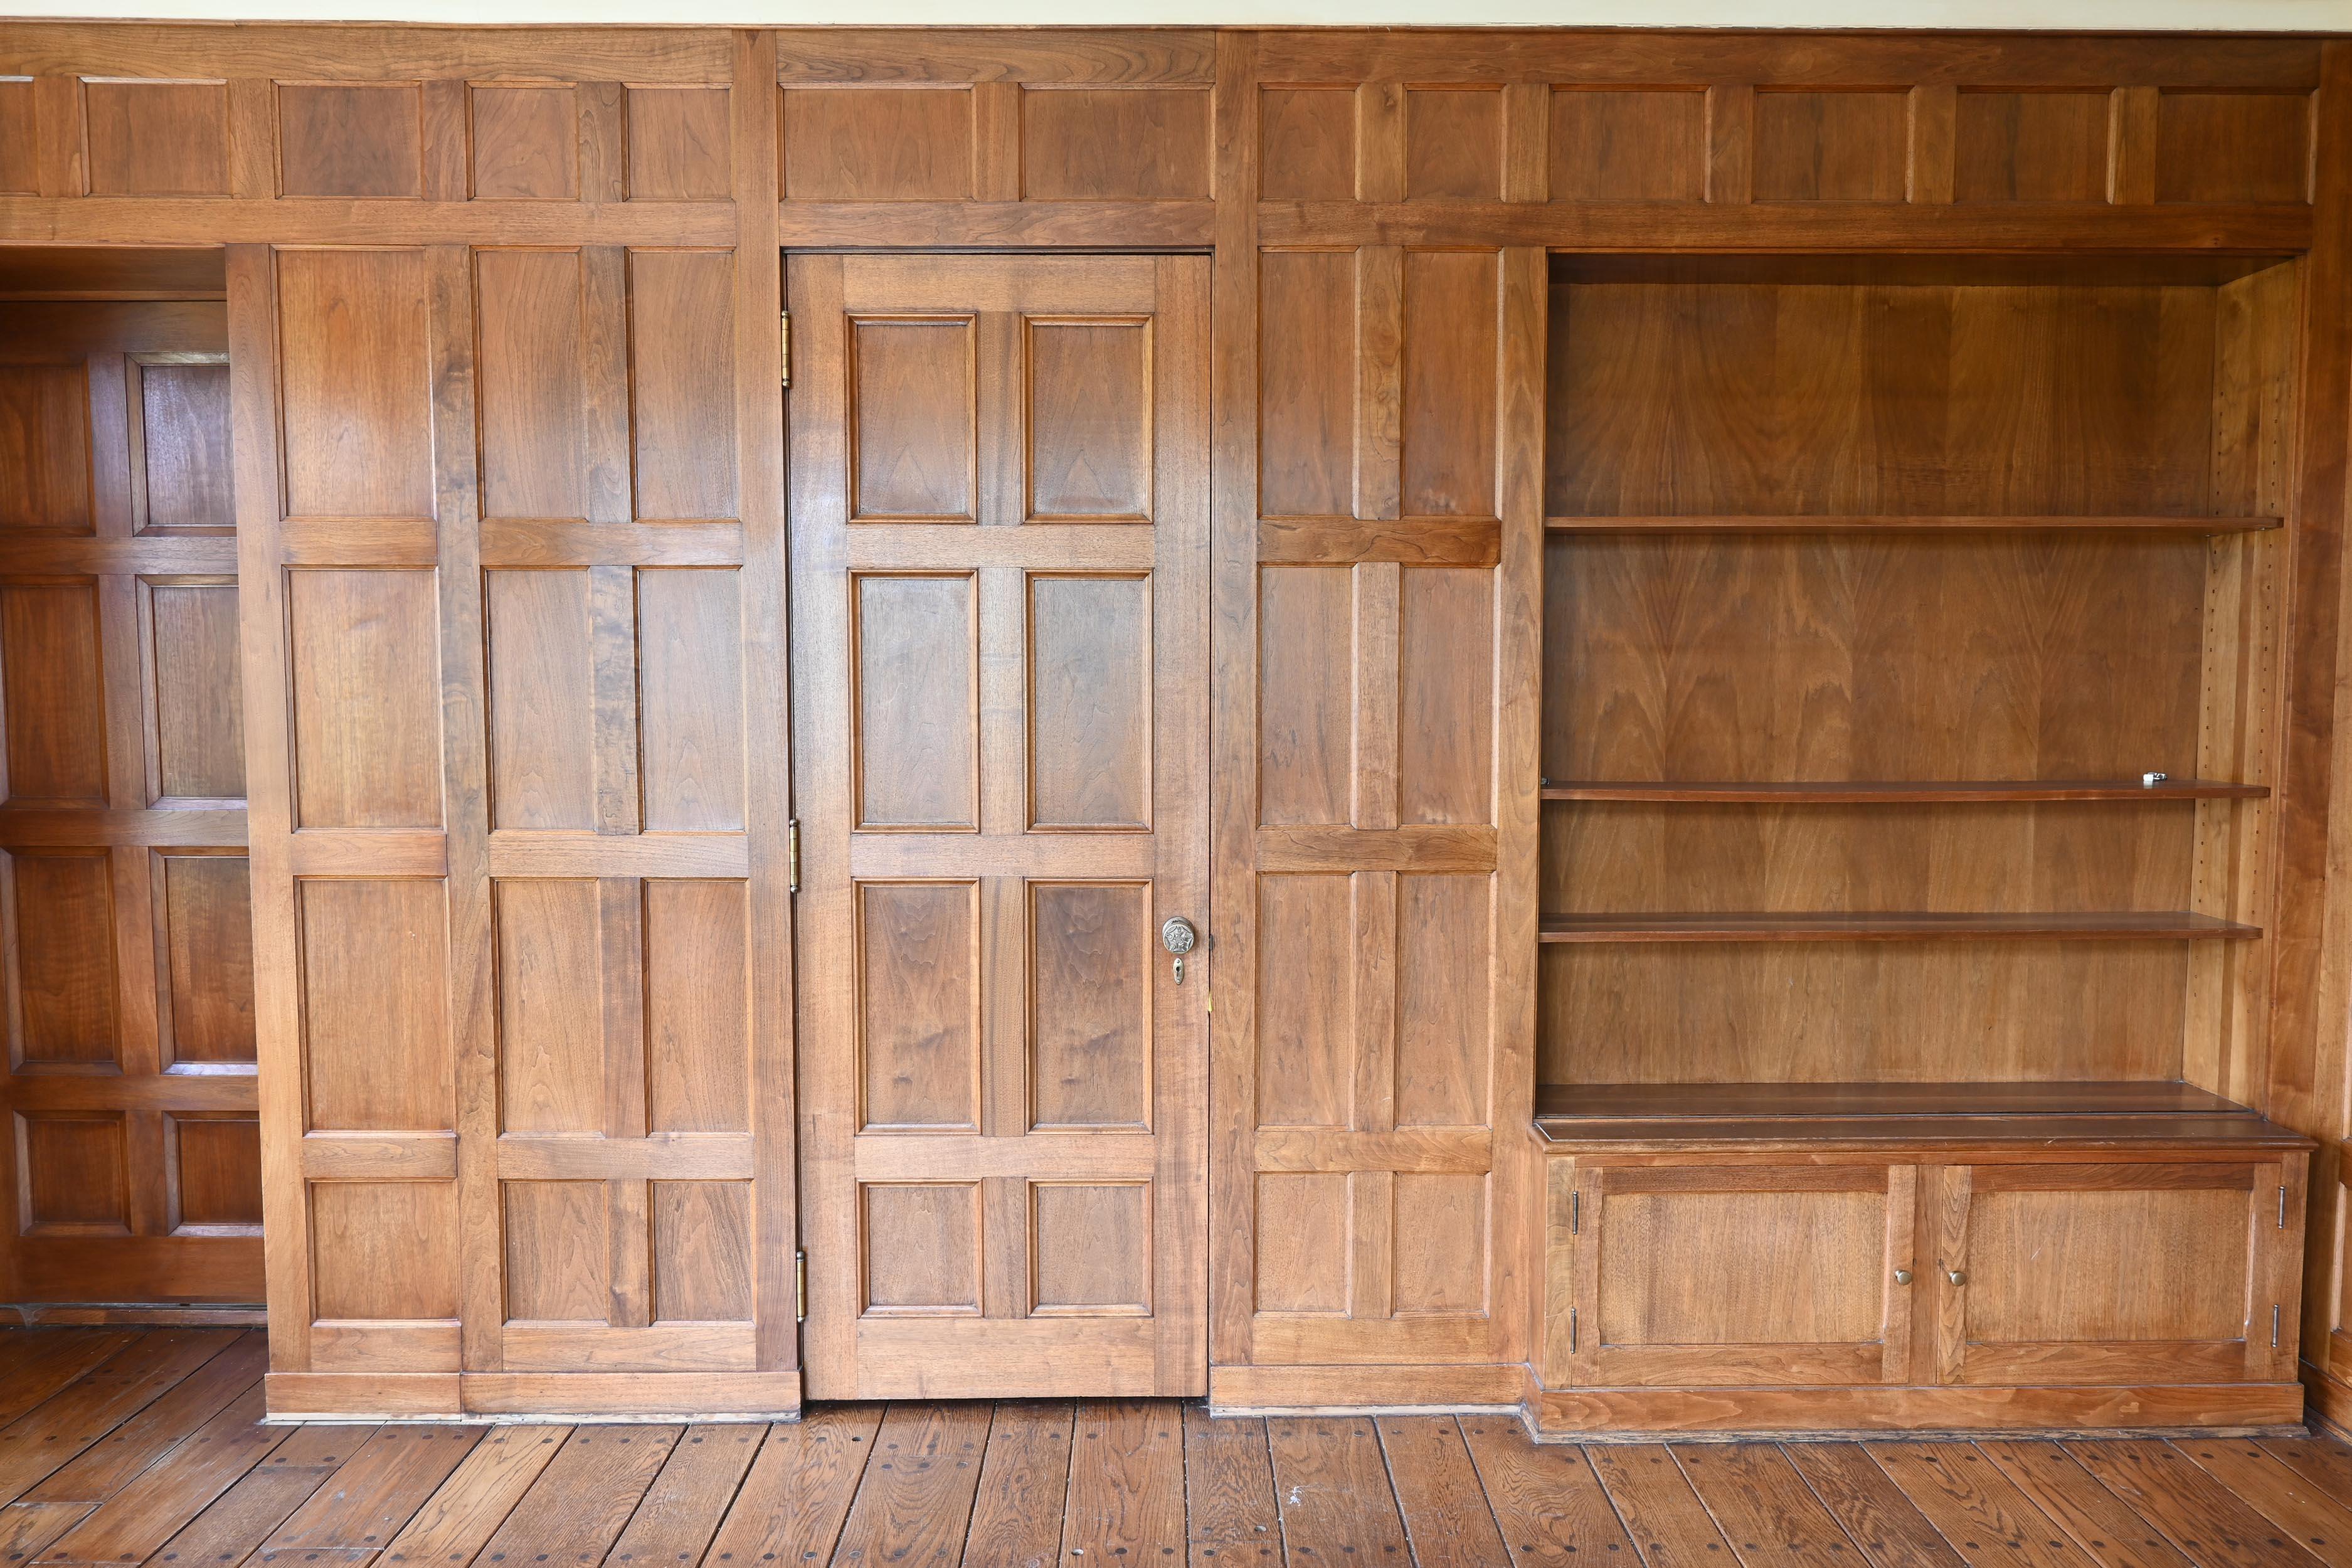 Butternut 'White Walnut' 1929 Paneled Library with Bookcases & Doors Complete In Good Condition For Sale In Minneapolis, MN